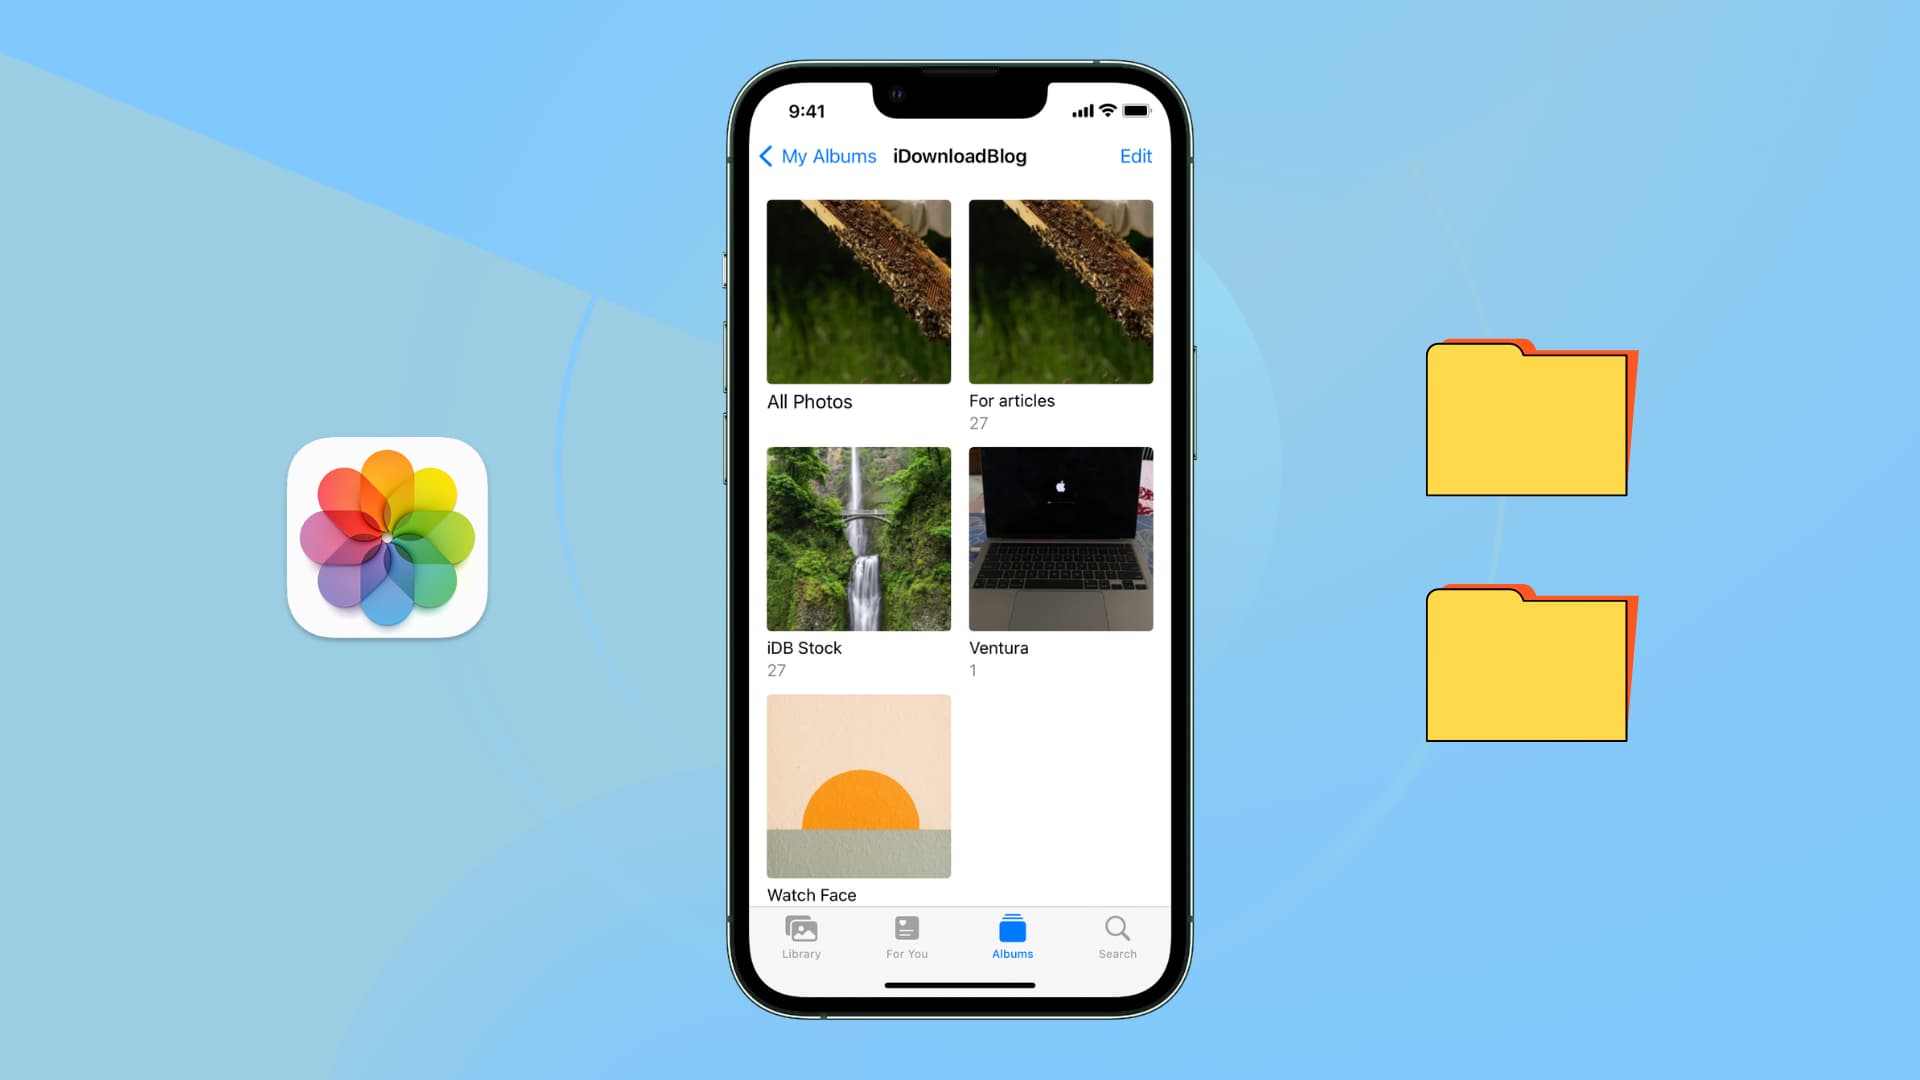 Folders inside the iPhone Photos app to store your photo albums